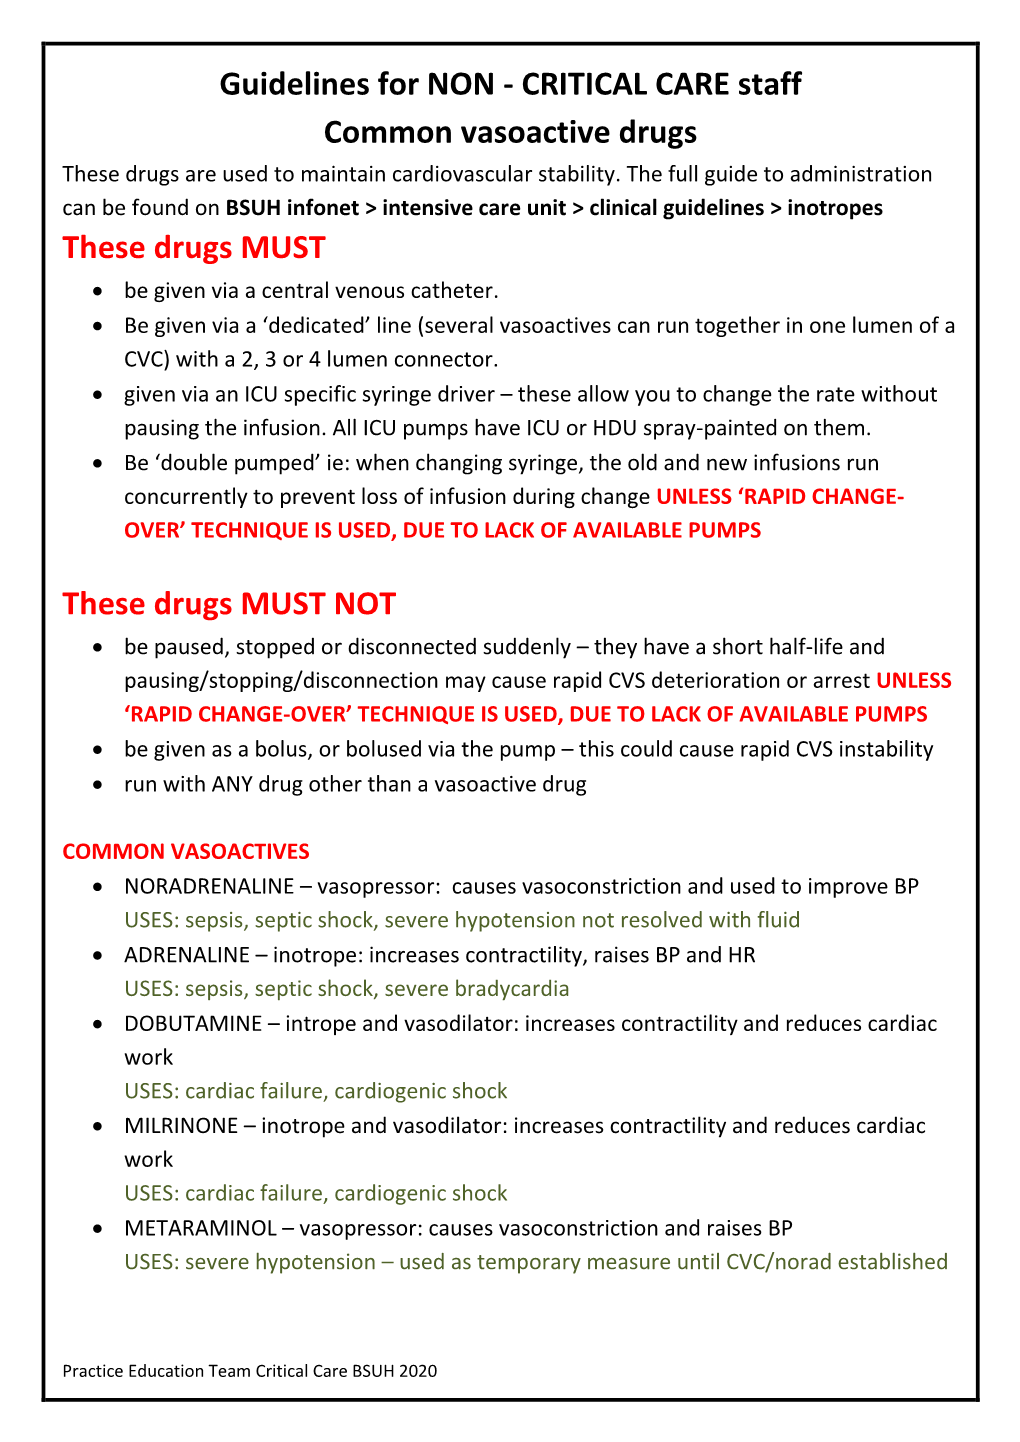 Guidelines for NON - CRITICAL CARE Staff Common Vasoactive Drugs These Drugs Are Used to Maintain Cardiovascular Stability